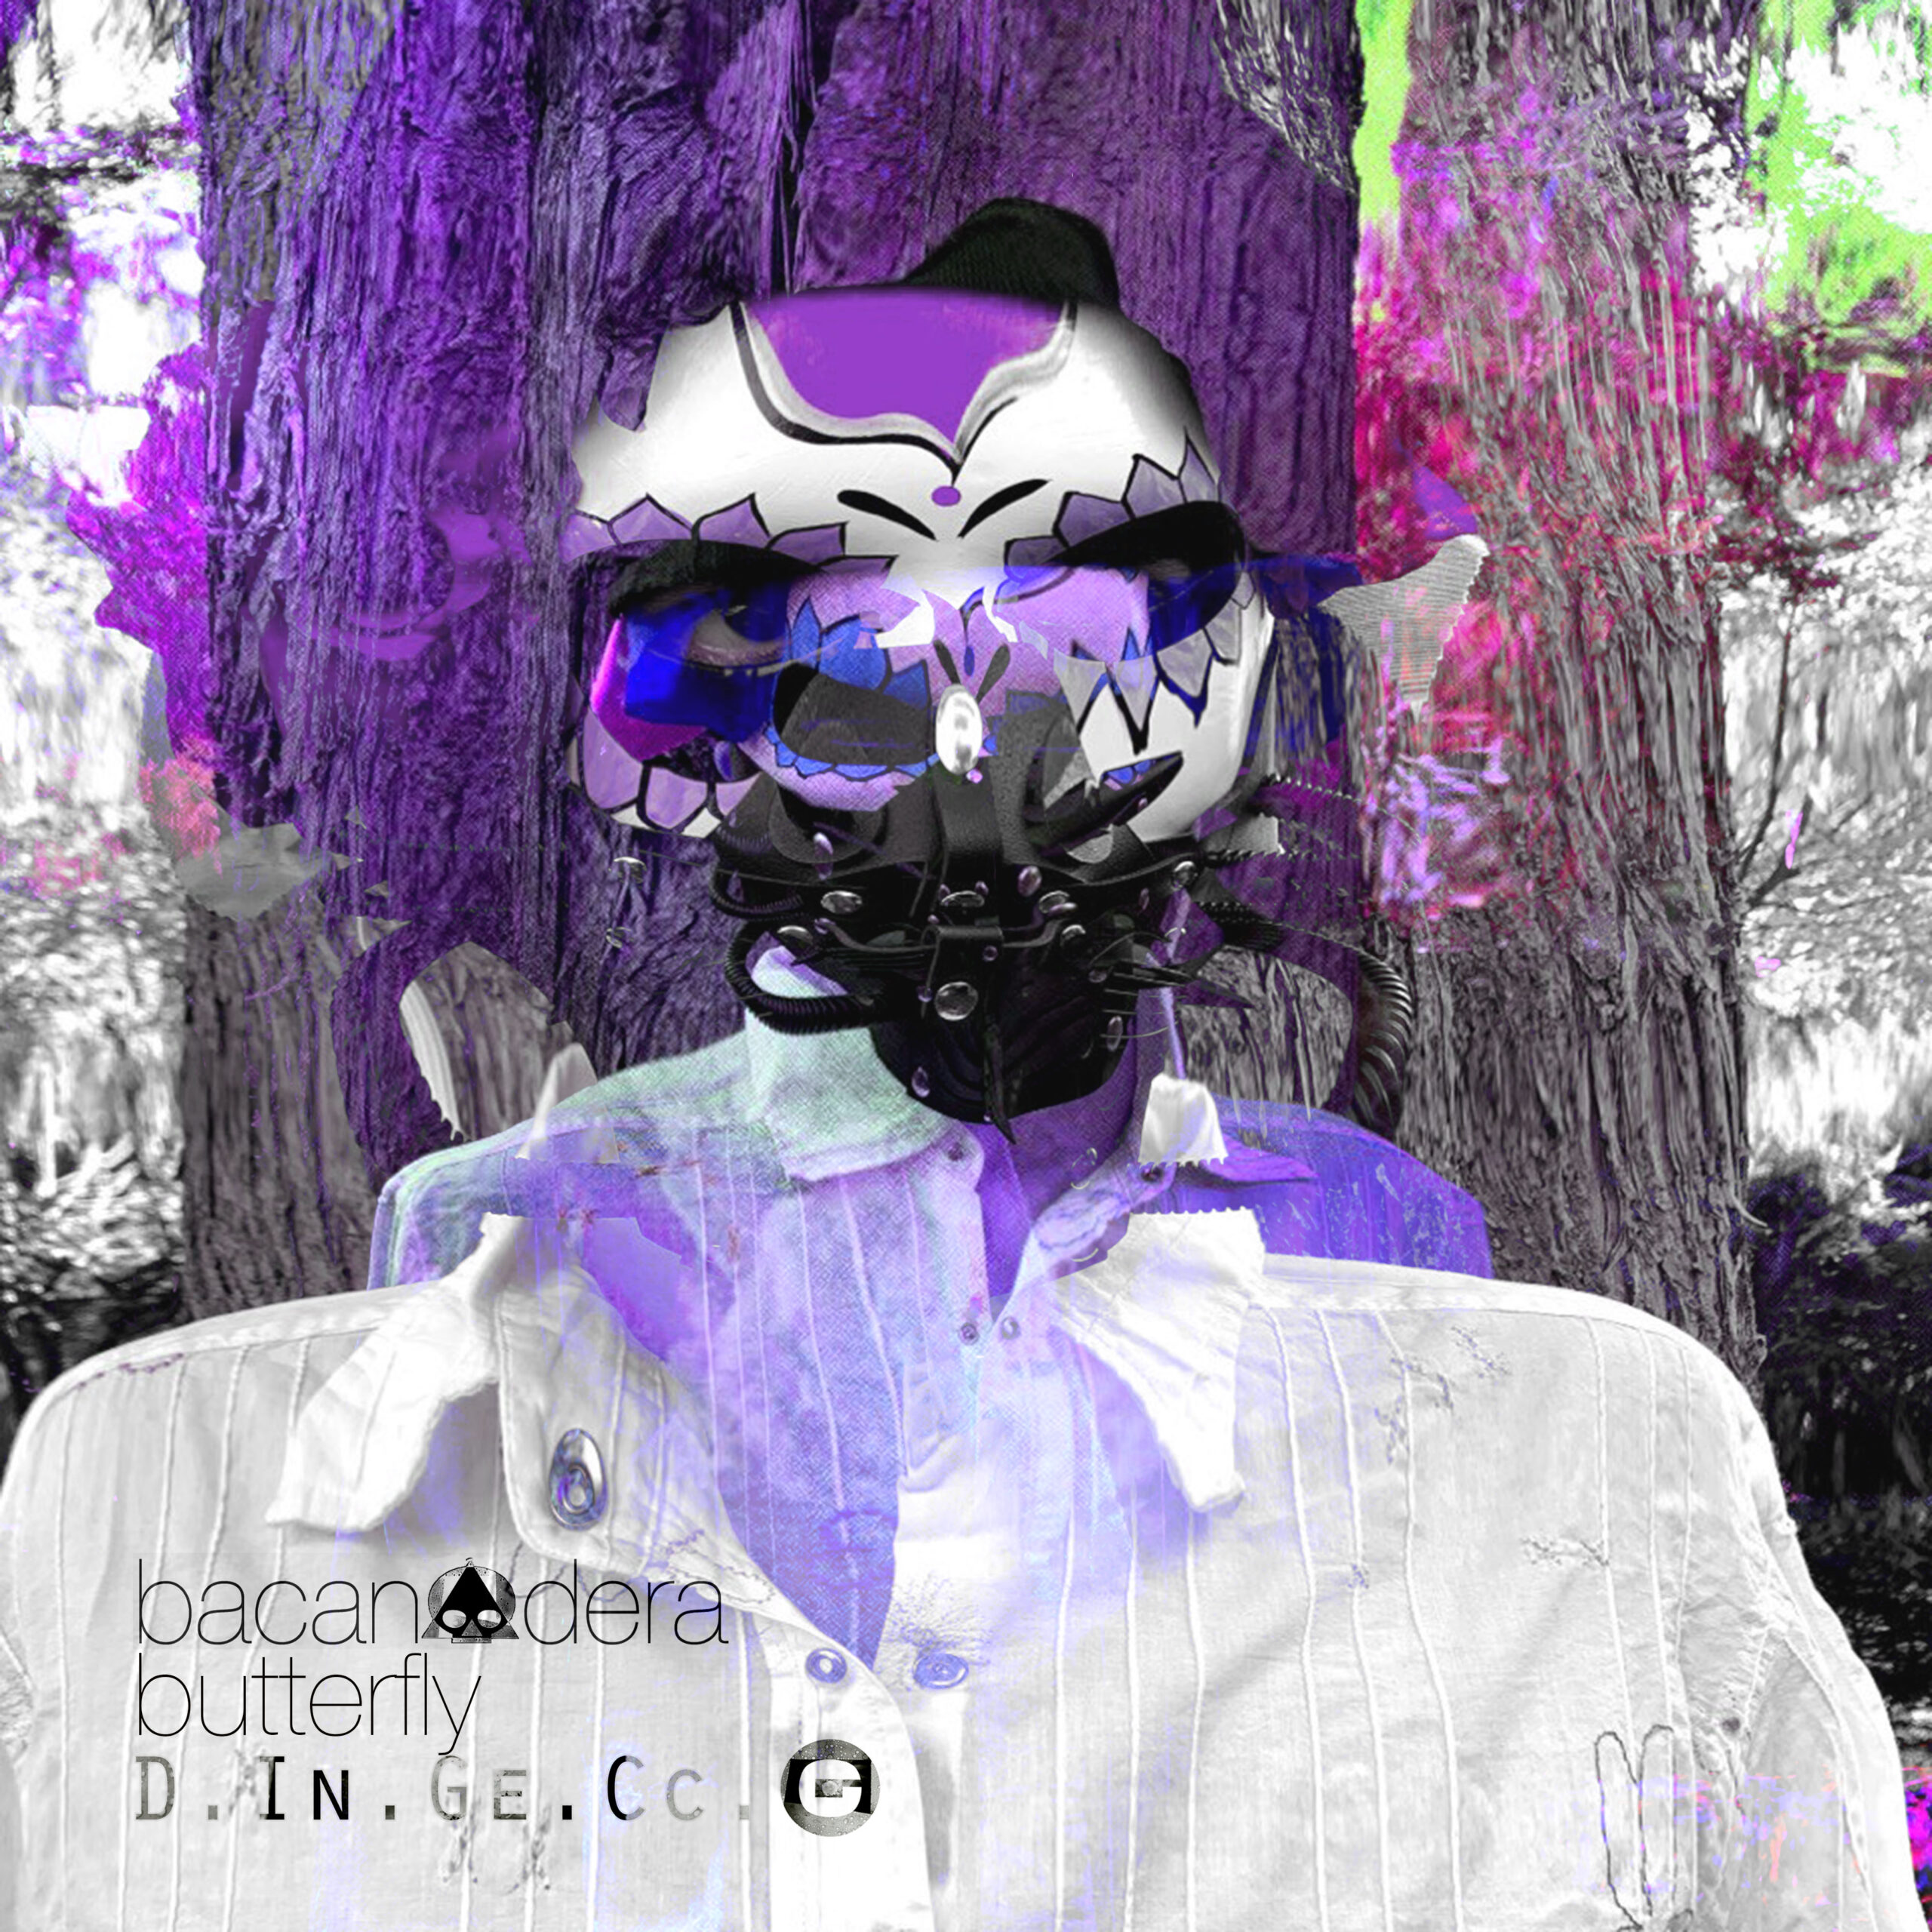 D.In.Ge.Cc.O – Bacanadera Butterfly [self-release]